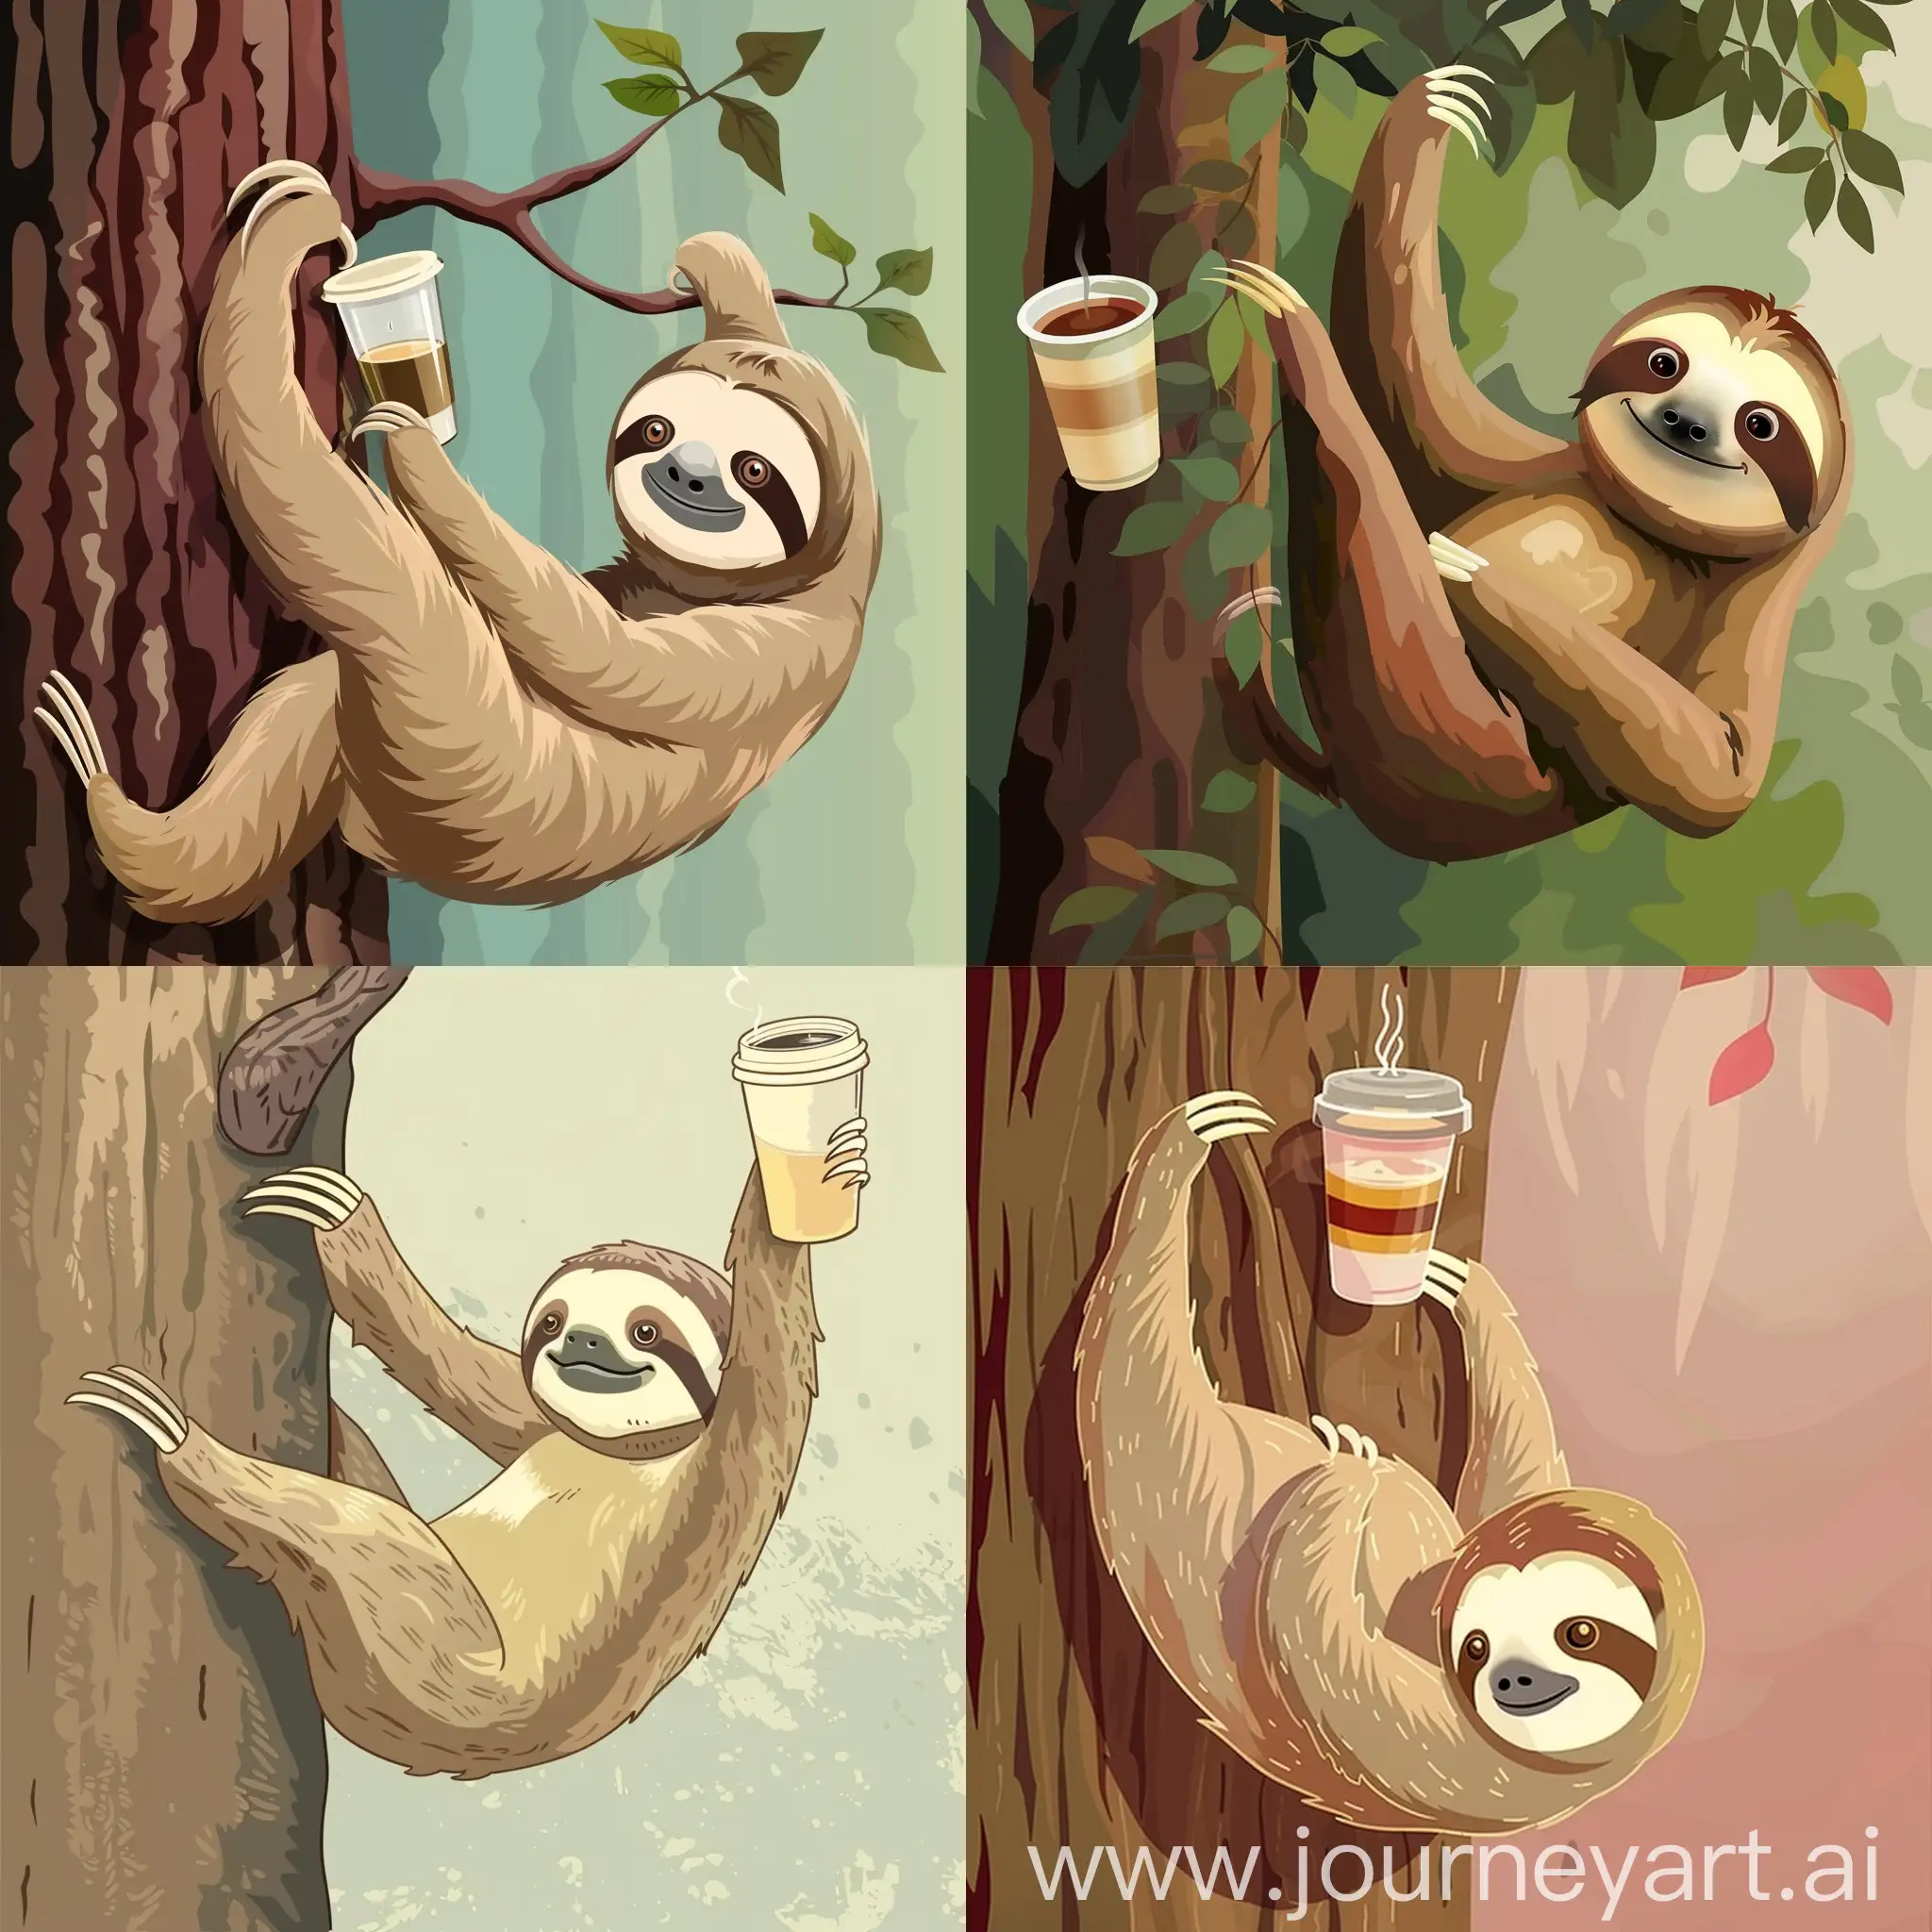 Cartoon-Sloth-Holding-Coffee-Cup-While-Hanging-on-a-Tree